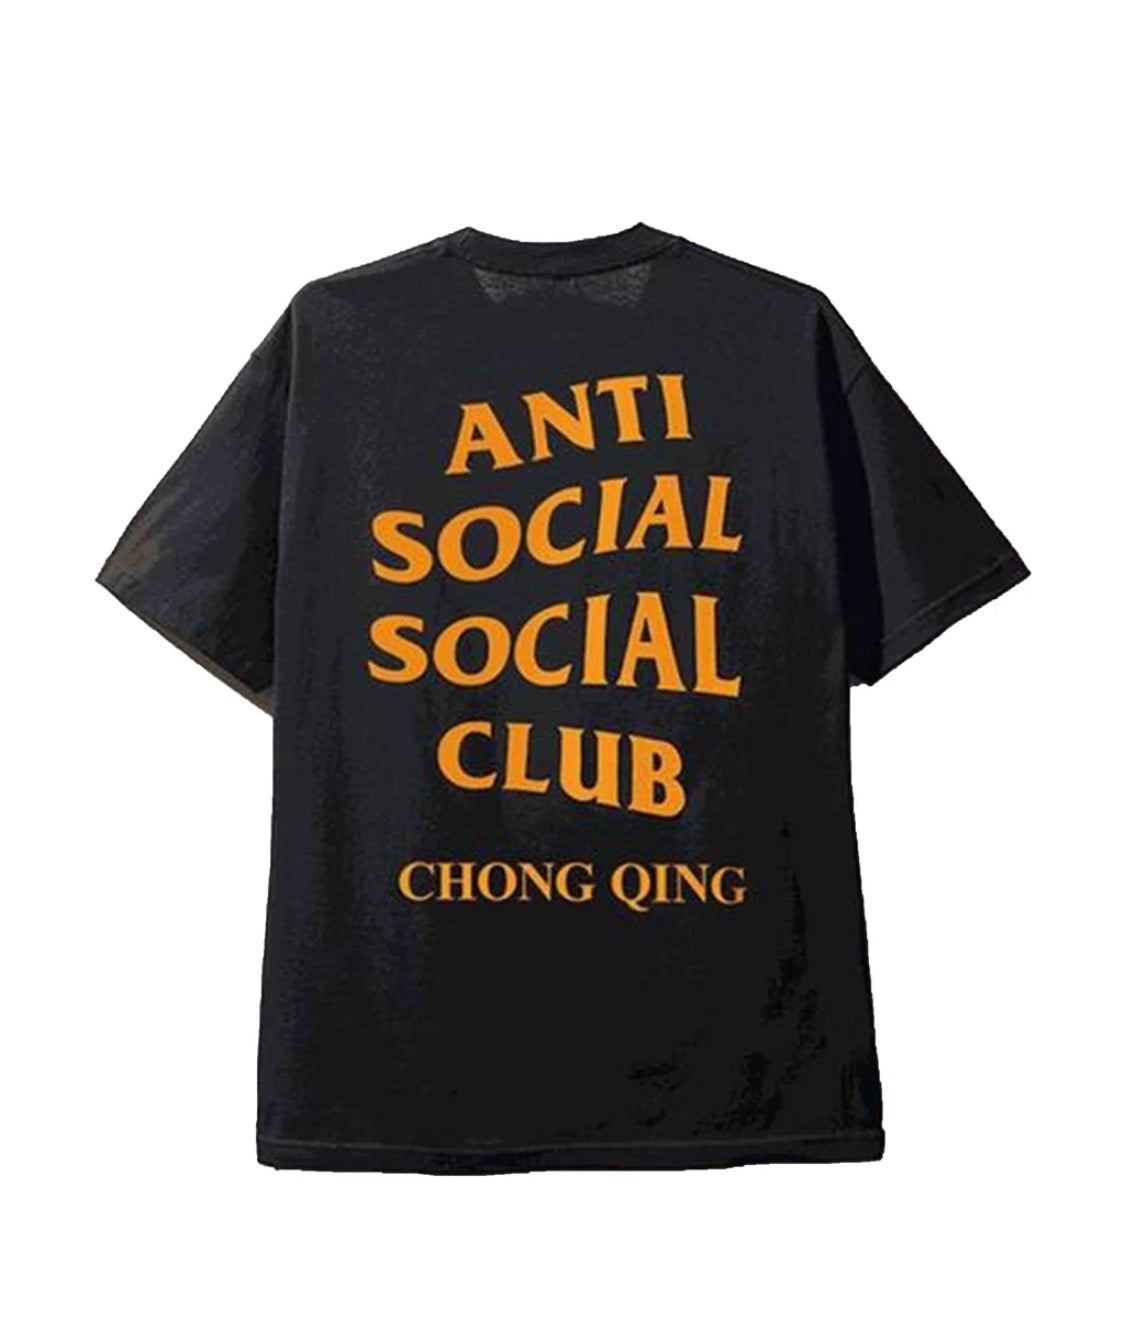 Anti Social Social Club Chong Qing T-Shirt - Shop Streetwear, Sneakers, Slippers and Gifts online | Malaysia - The Factory KL